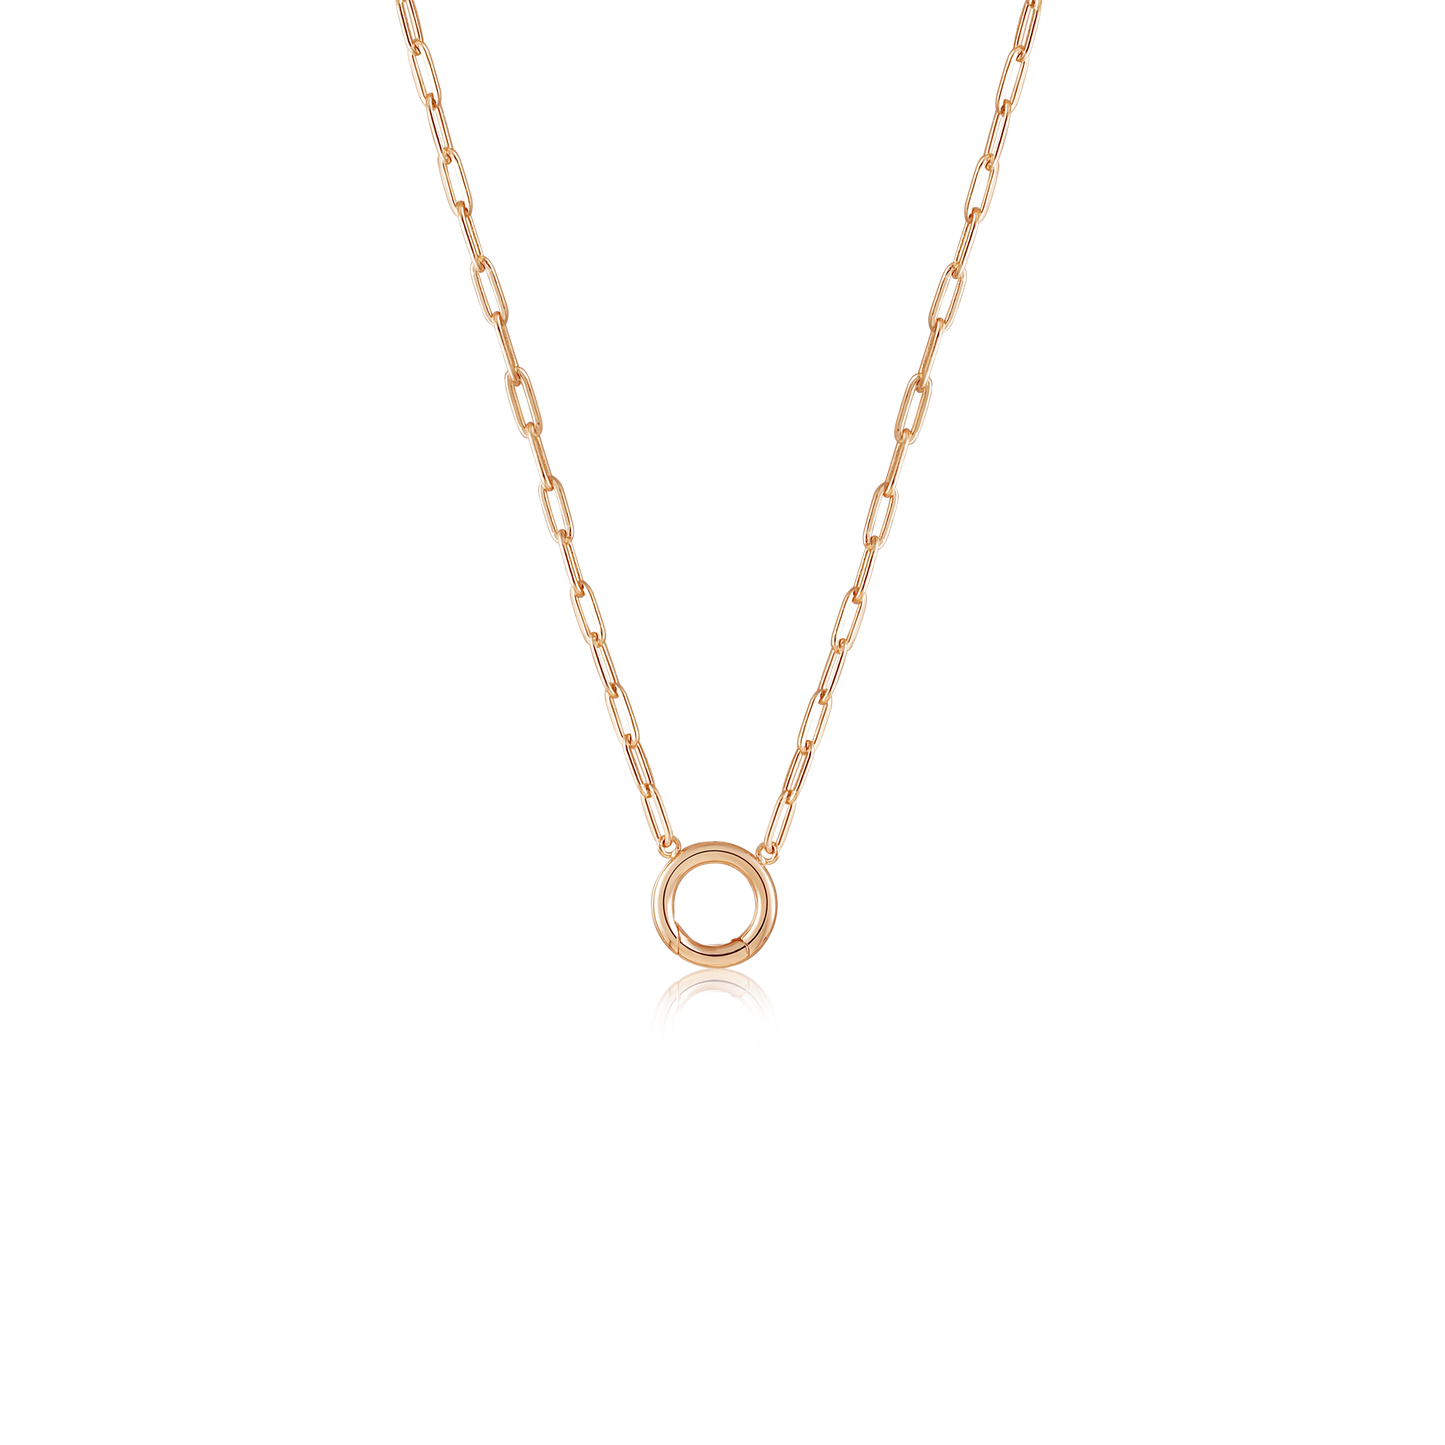 Gold Charm Carrier Necklace Chain